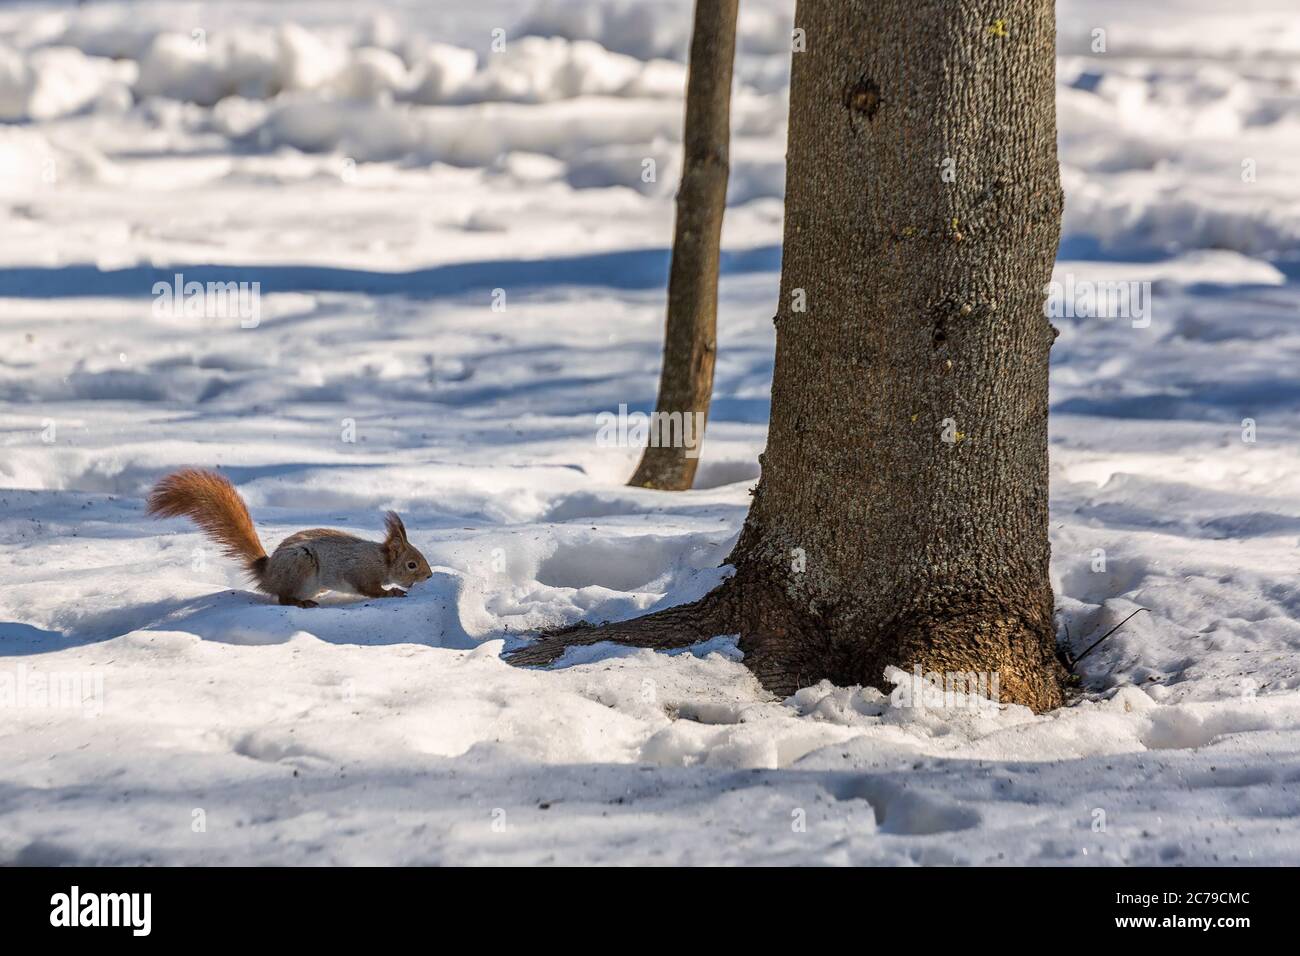 Panoramic winter landscape. Squirrel on the snow in forest with inclined trees, Minsk, Belarus. Stock Photo